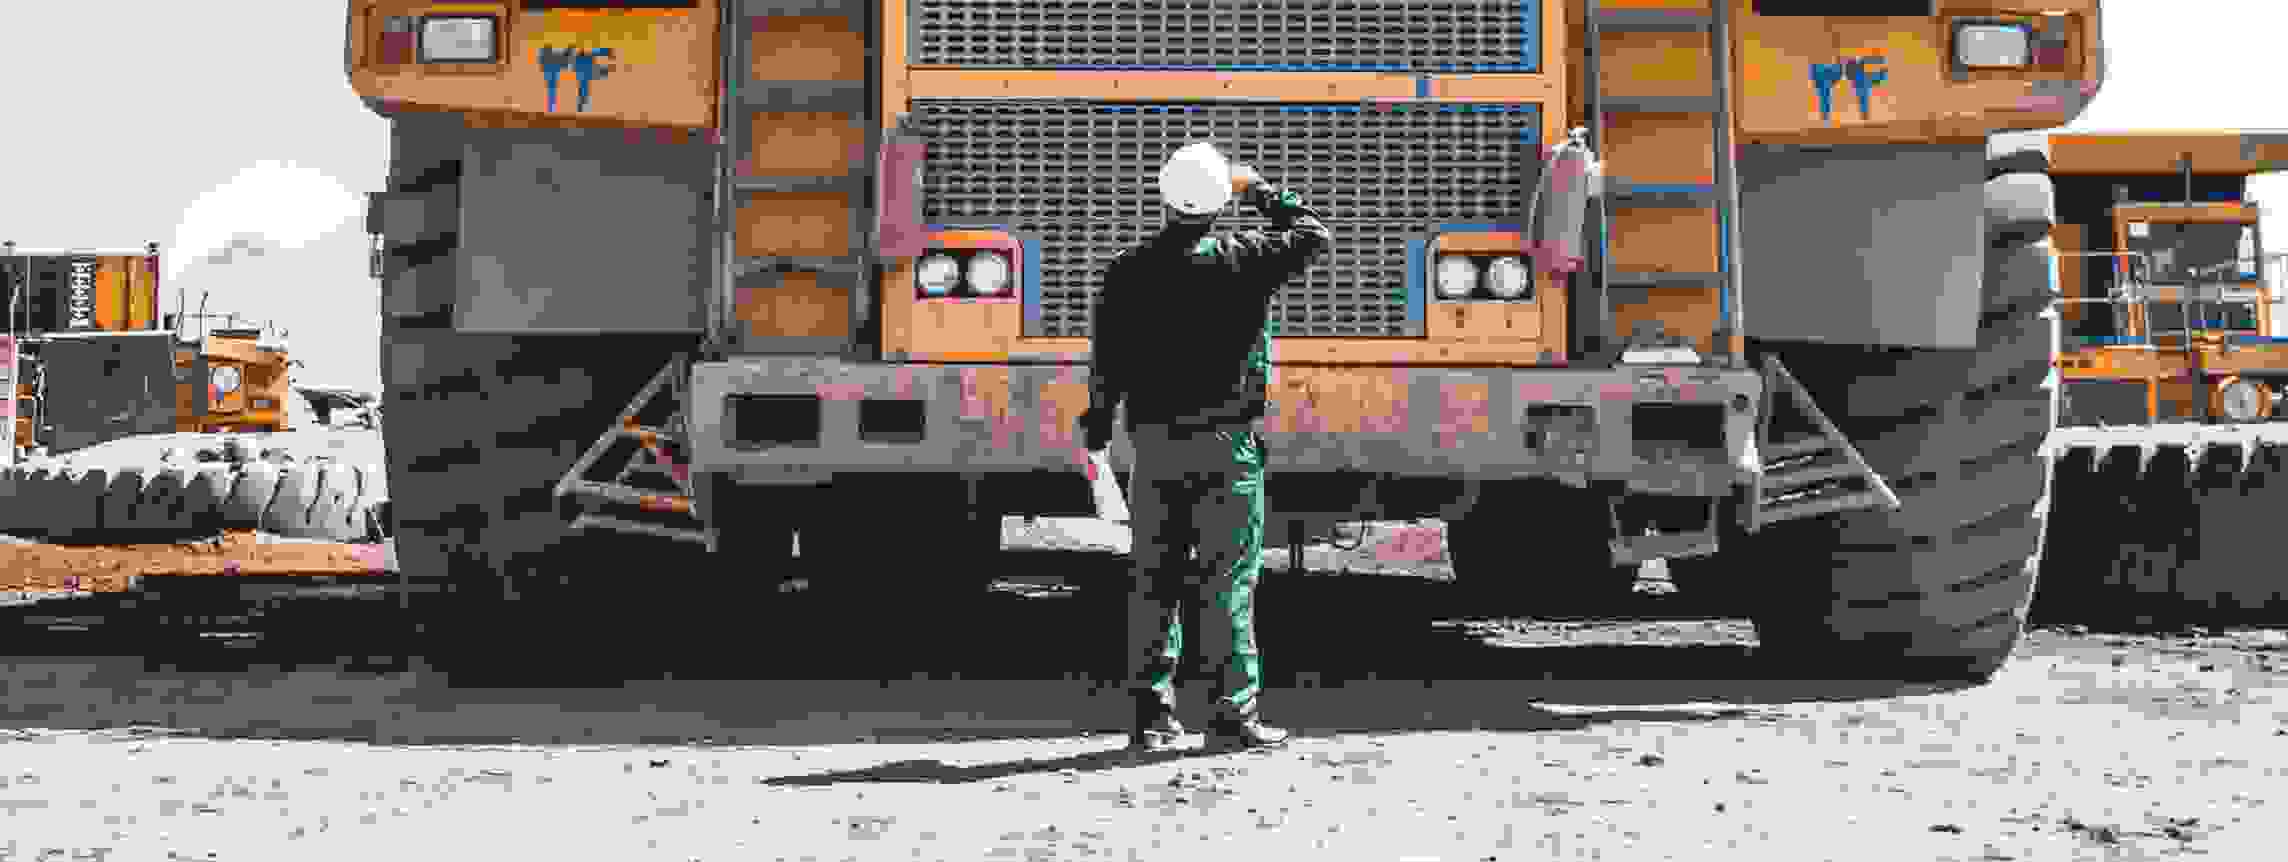 Construction worker looking at large vehicles at a mine